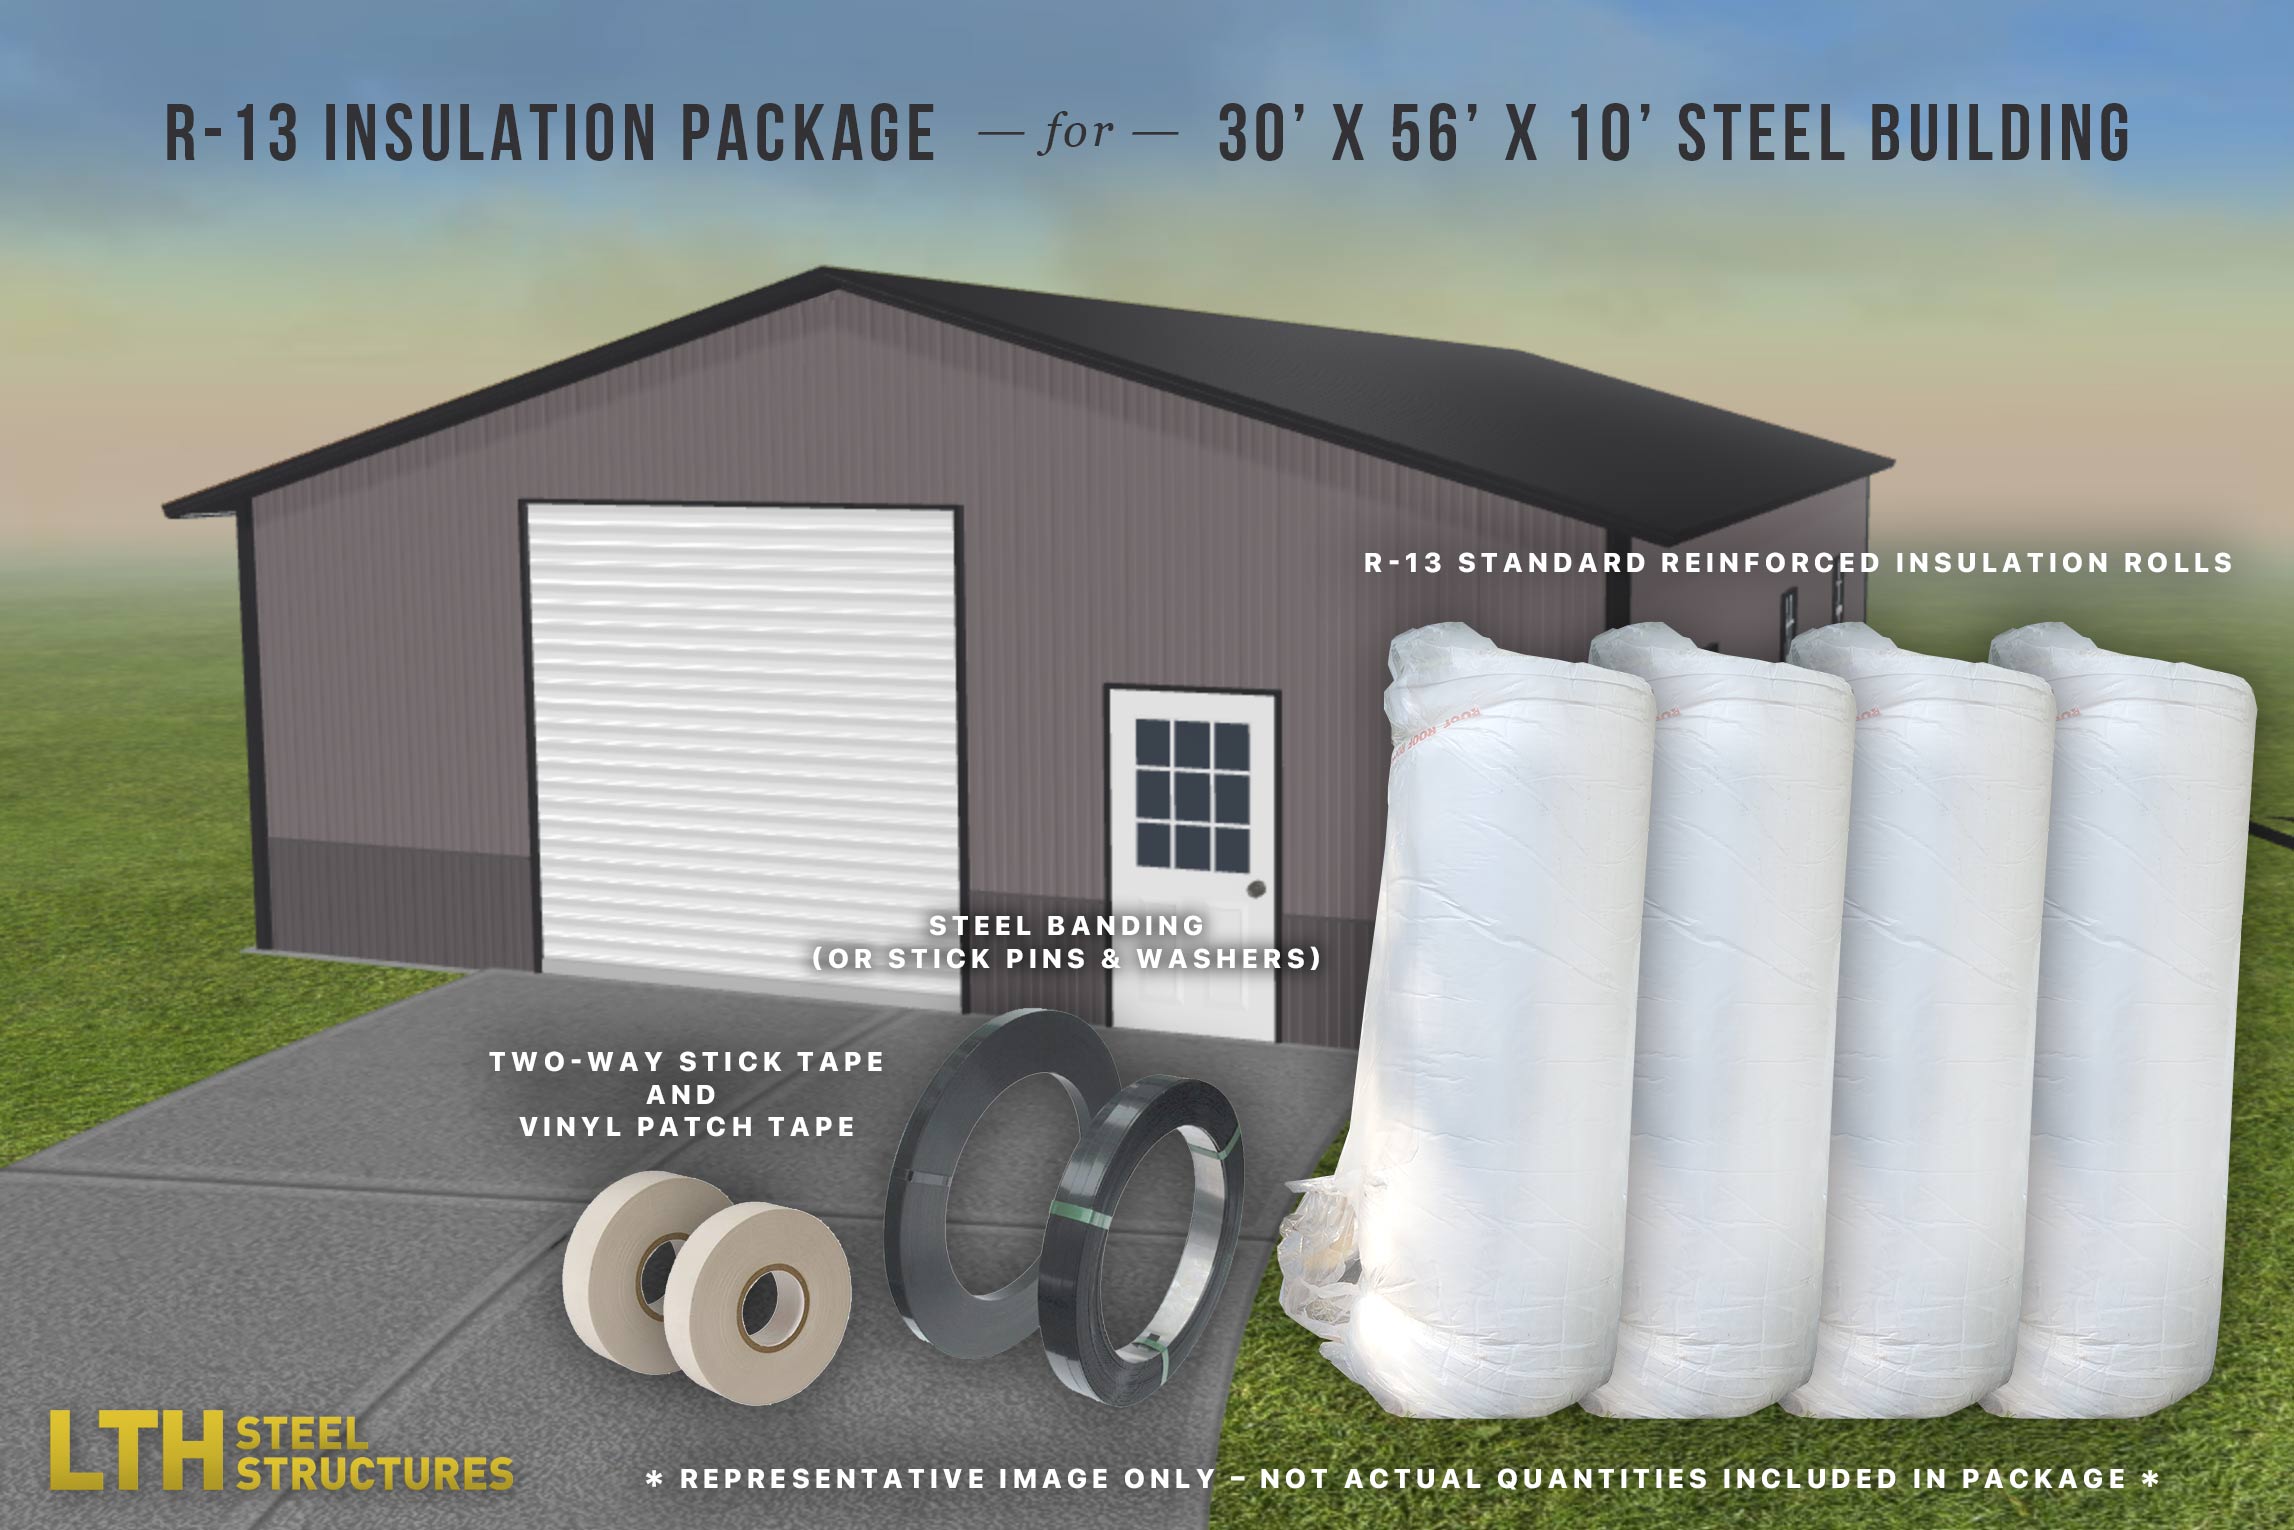 R-13 Insulation Package for a 30' x 56' x 10' Steel Building